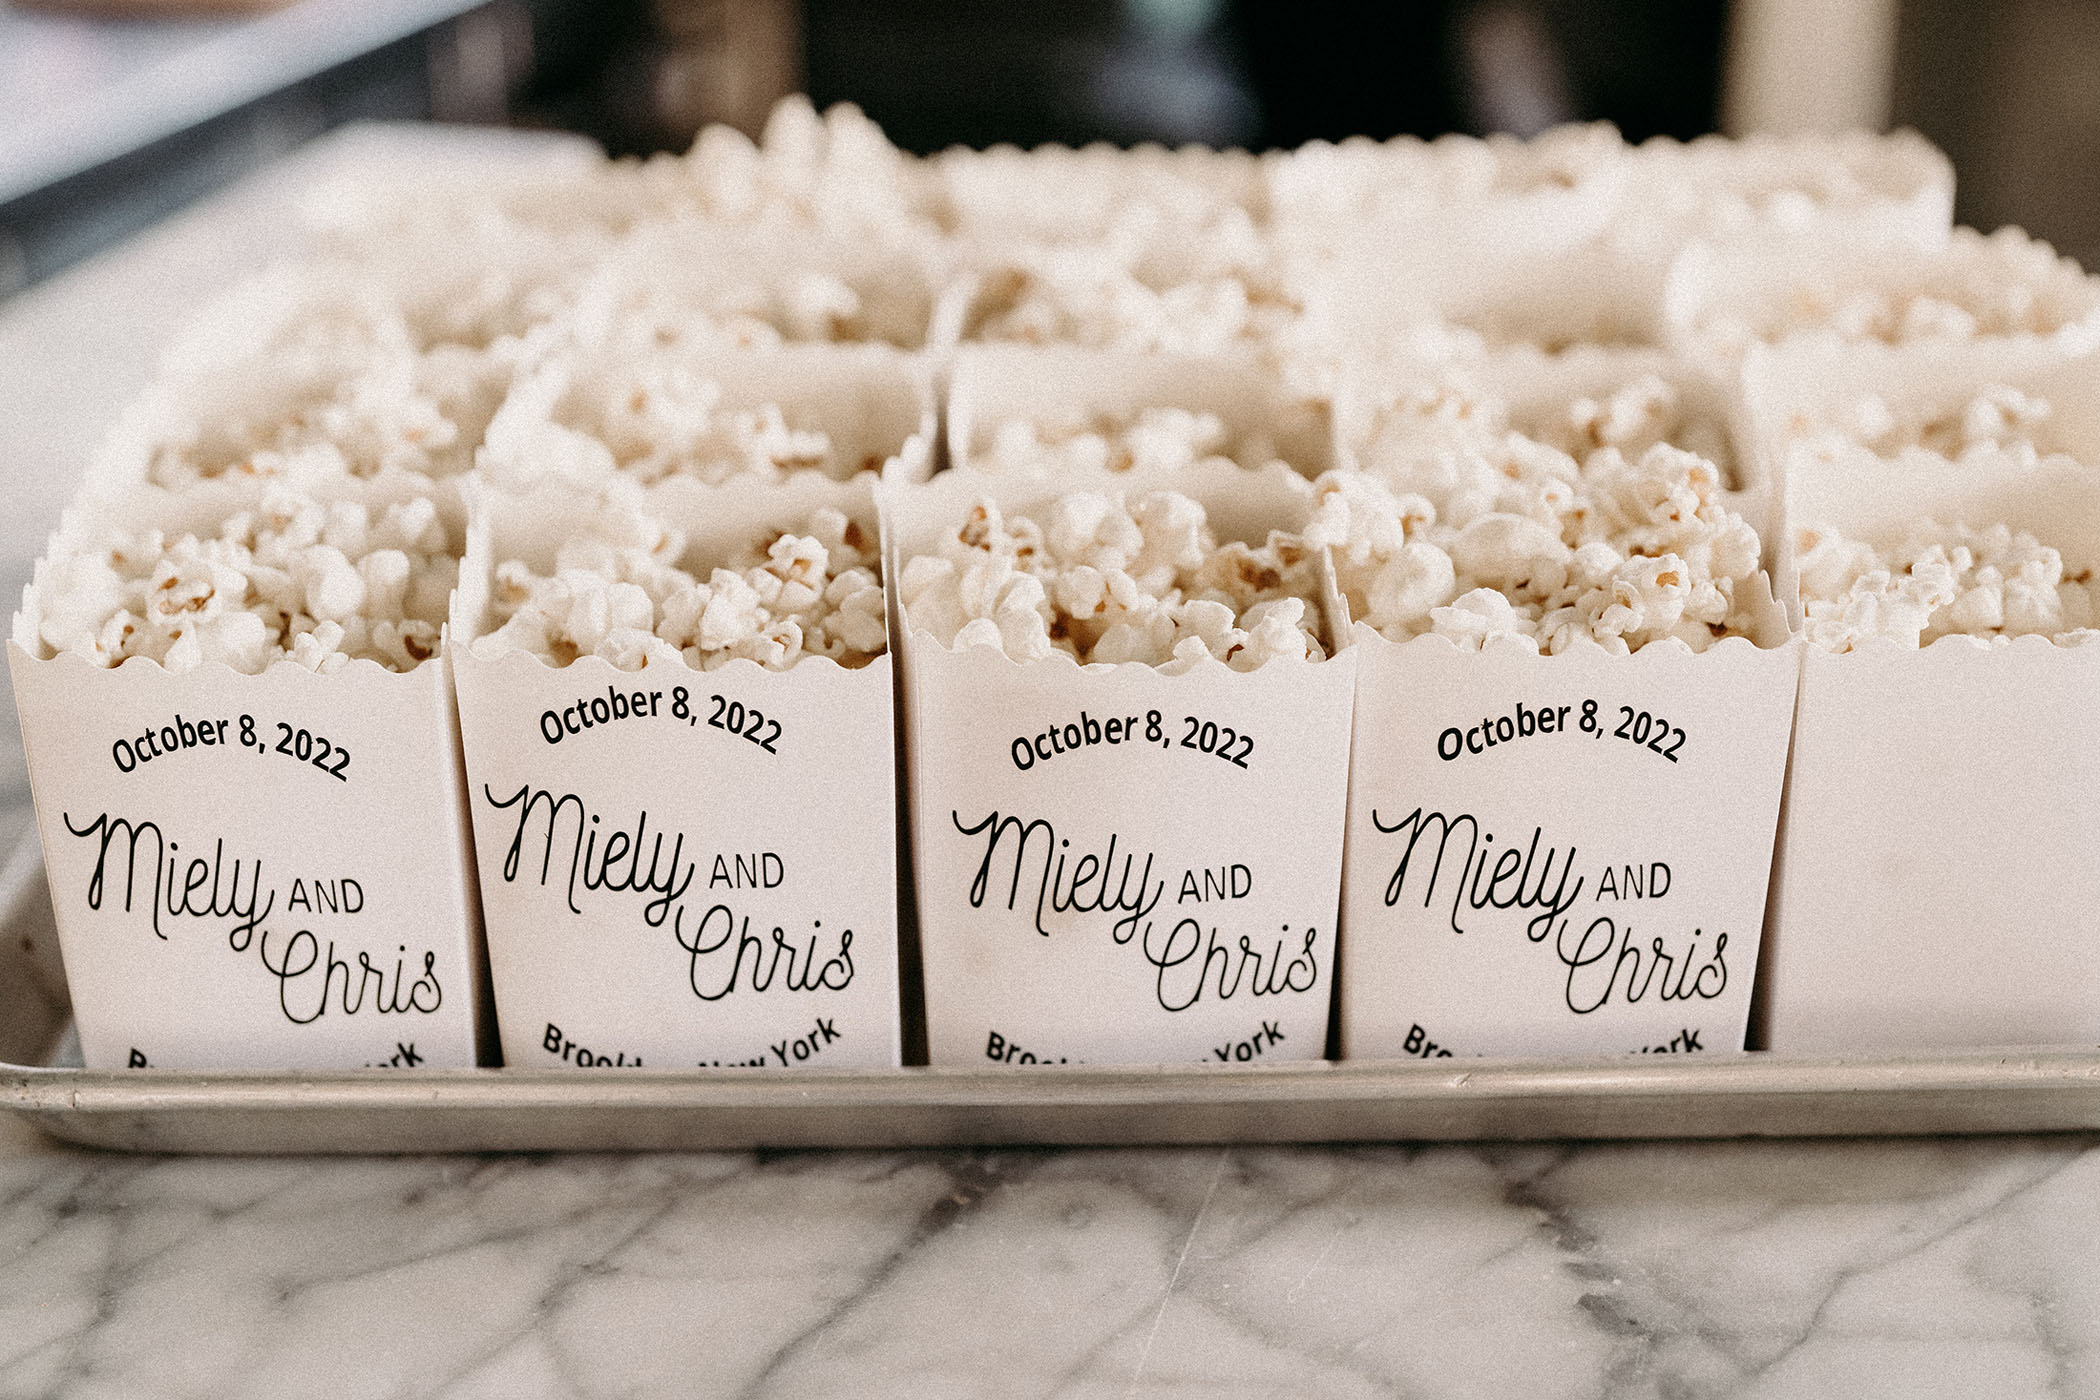 Unique and Playful Wedding in a Brooklyn, New York Movie Theatre